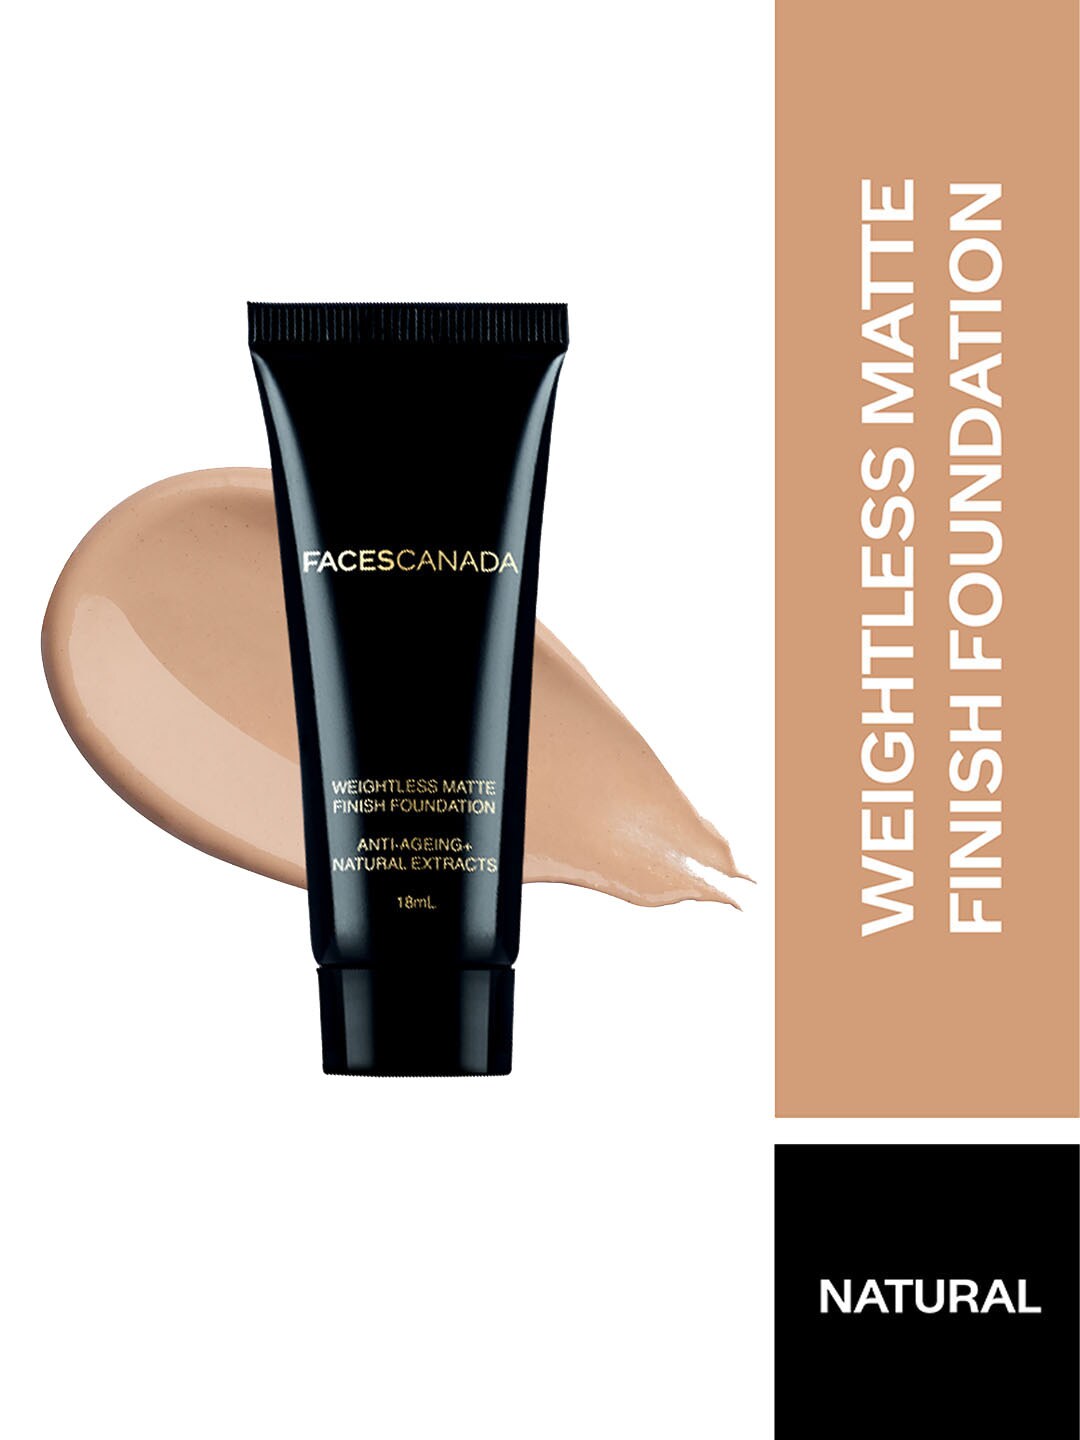 FACES CANADA Weightless Matte Finish Mini Foundation Natural 02 18ml Price in India